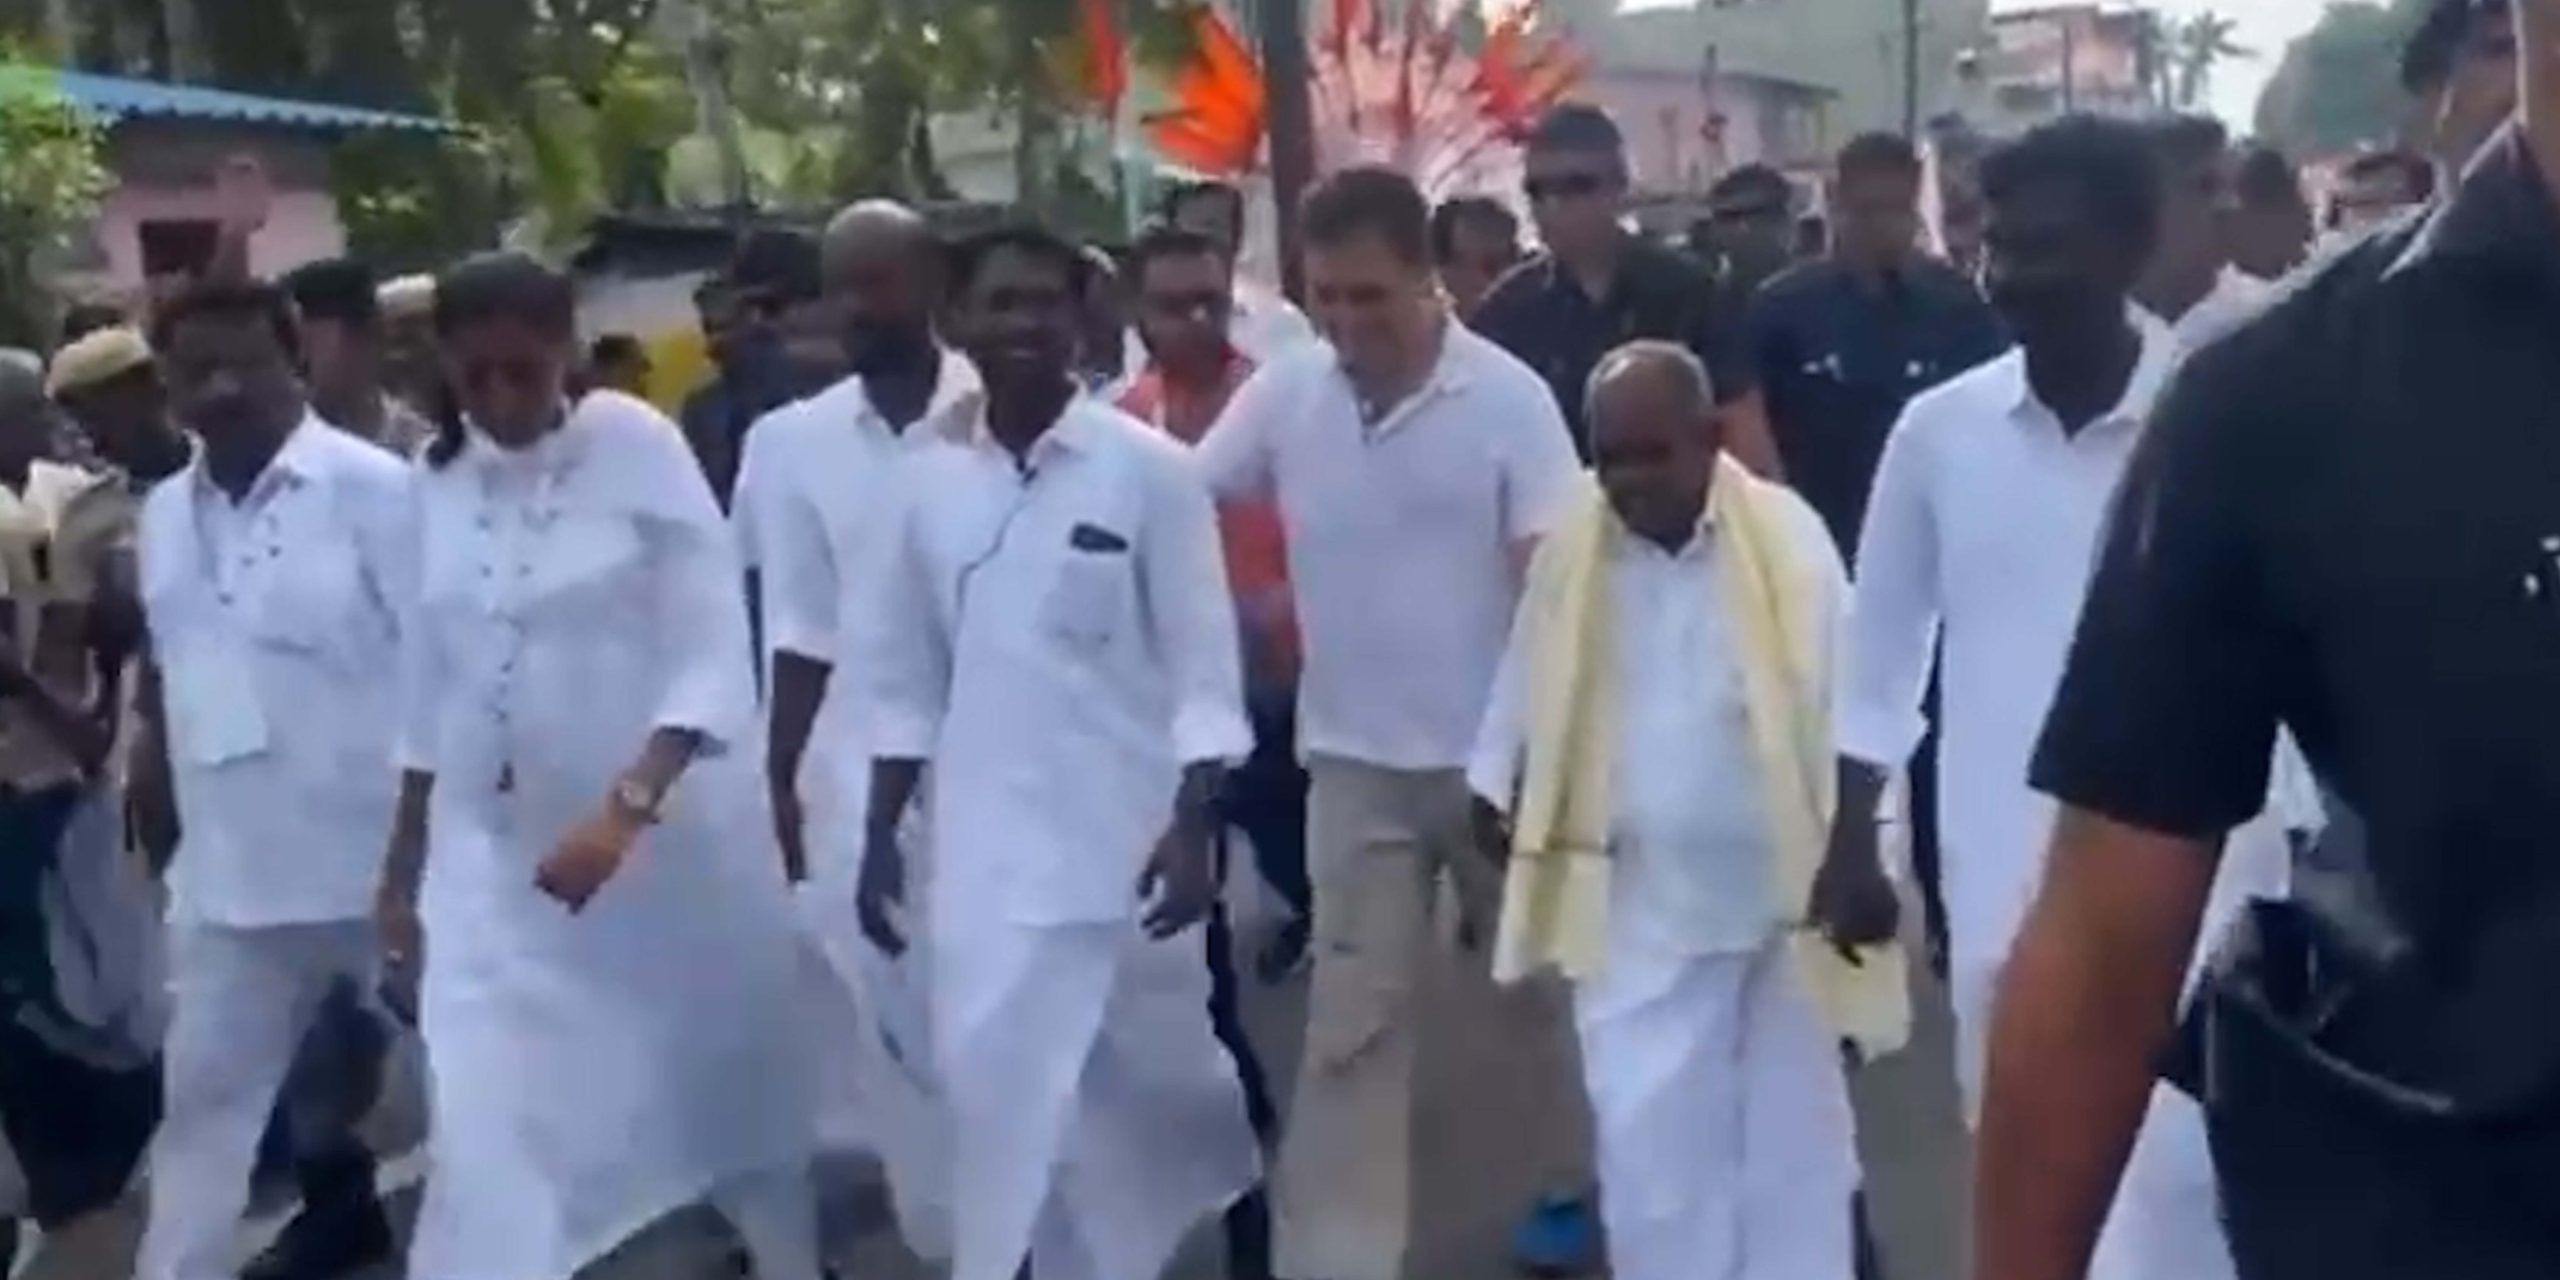 Rahul Gandhi interacts with farmers on the third day of the Bharat Jodo Yatra on Friday, 9 September. (South First)